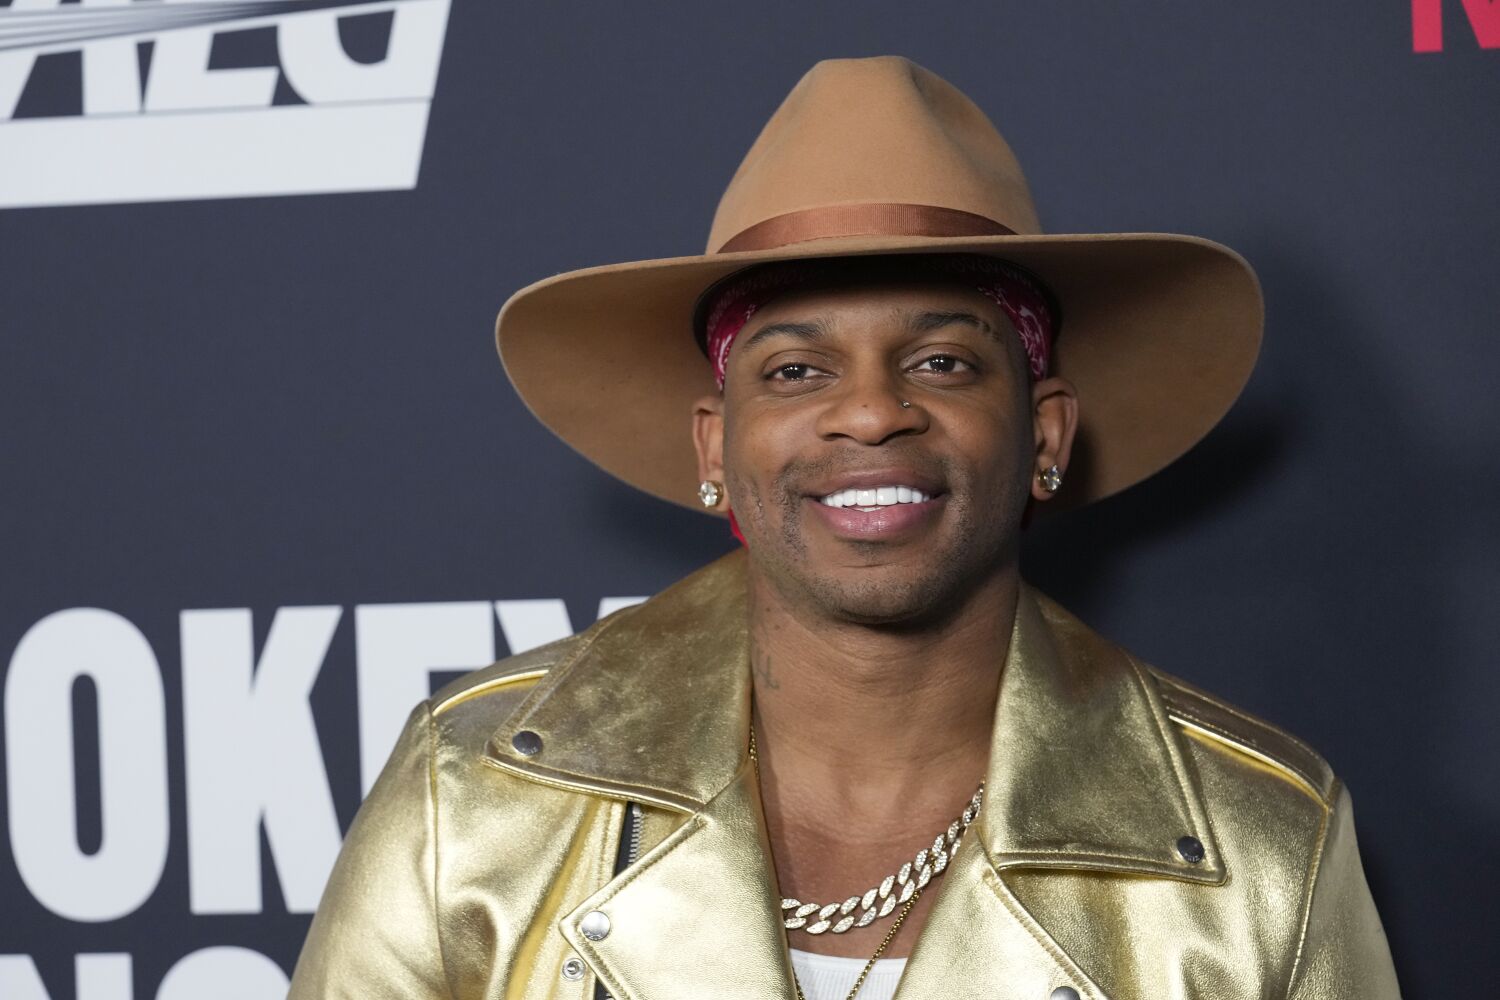 Jimmie Allen dropped from record label following second sexual assault lawsuit